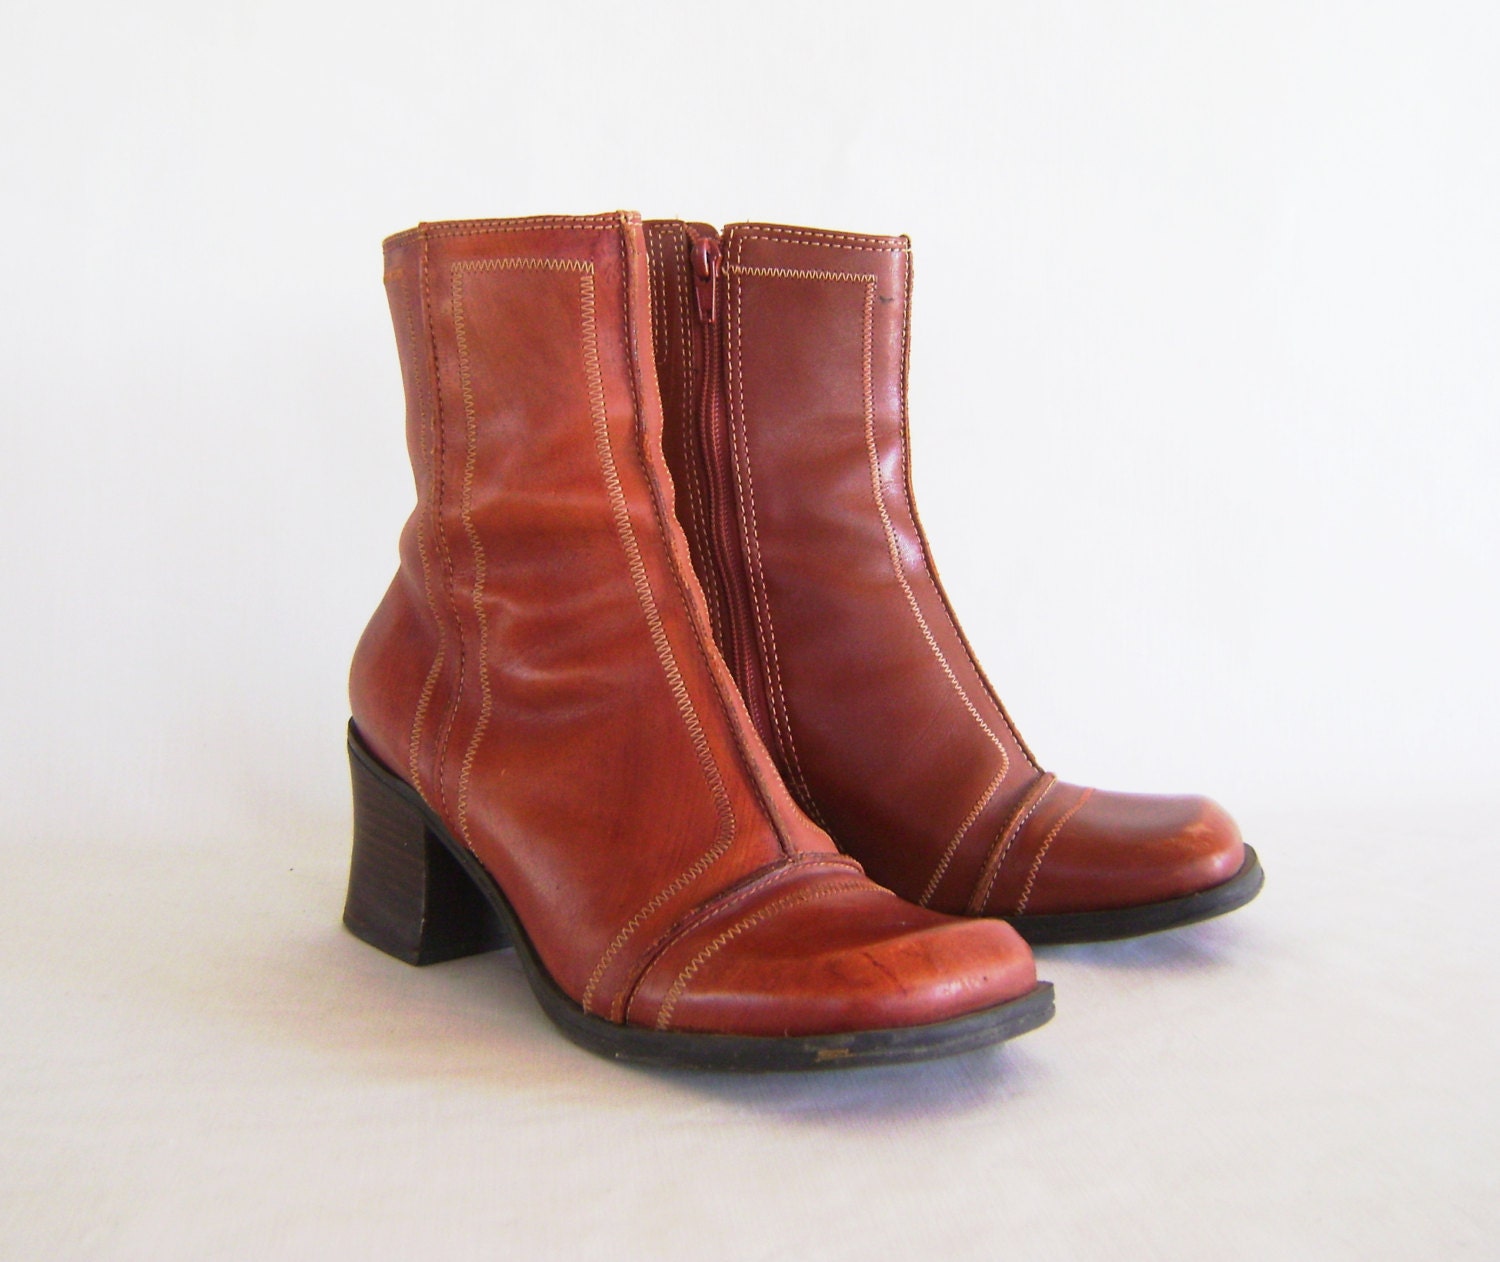 90s Leather Boots – Two Lips Brown Square Toe Booties – Ladies Size 8